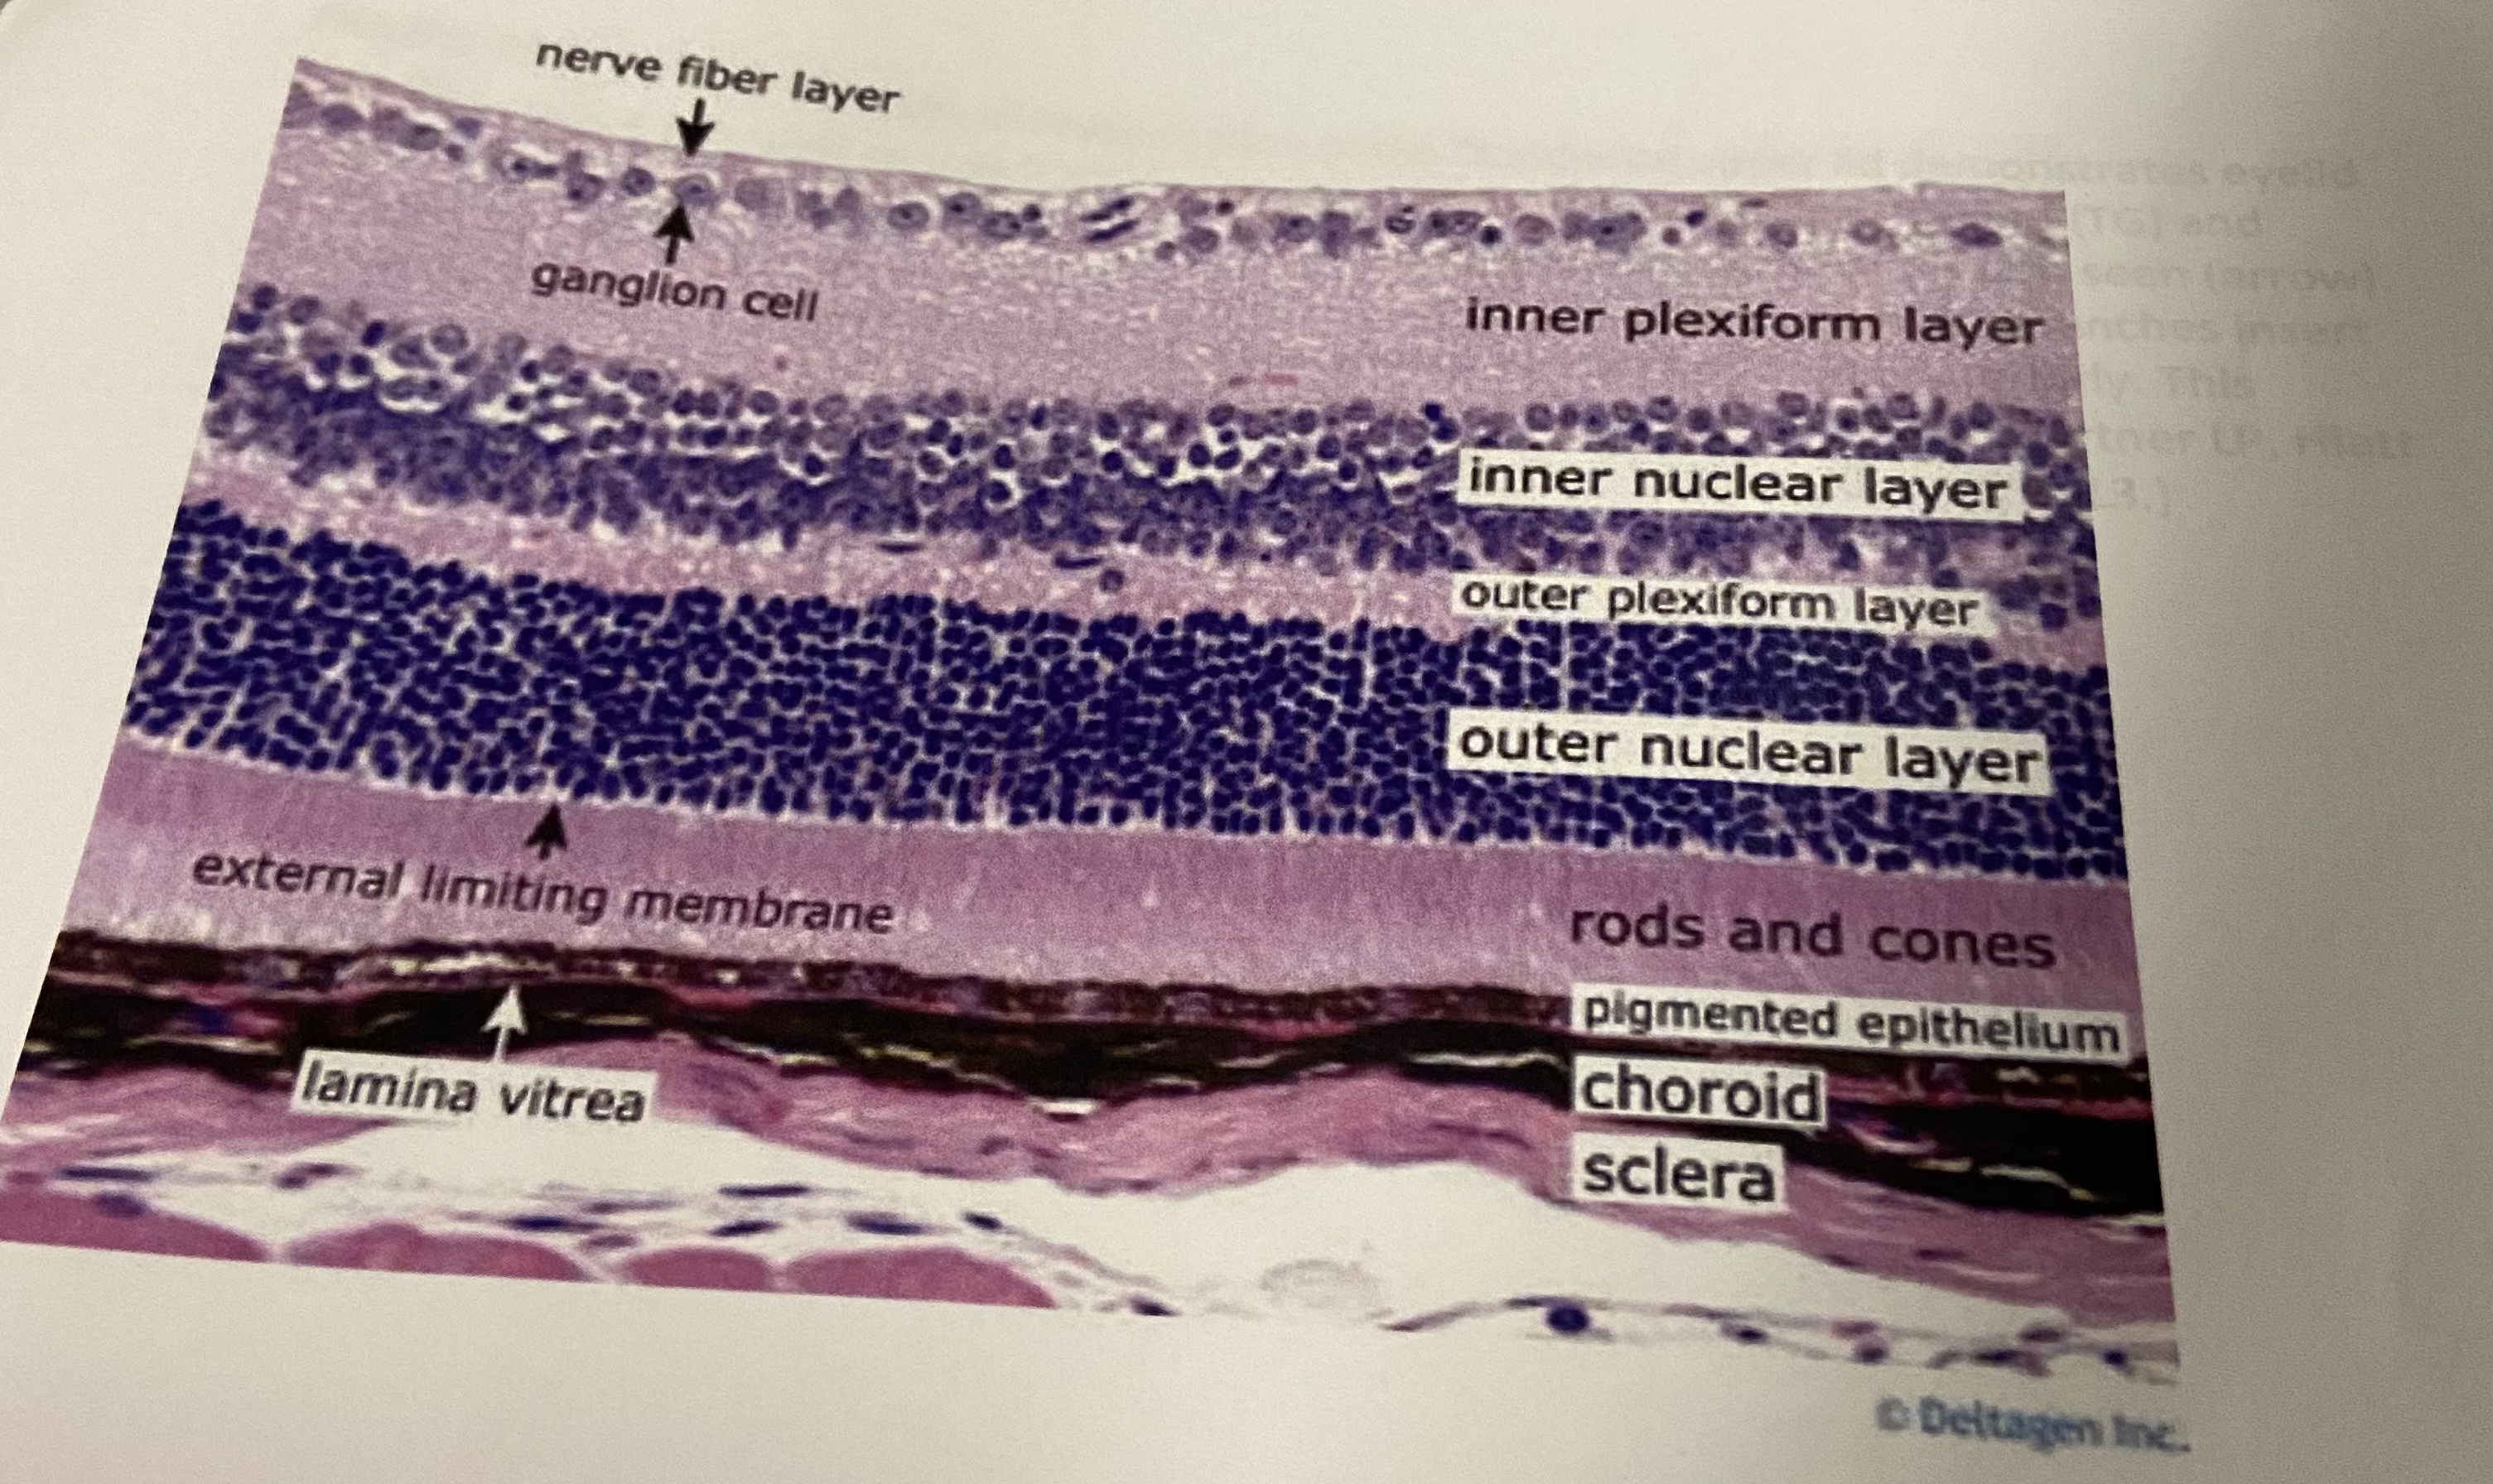 <p>1-inner nuclear layer 2-outer plexiform layer 3-outer nuclear layer 4- pigmented epithelium 5-choroid 6-sclera 7-lamina vitrea</p>